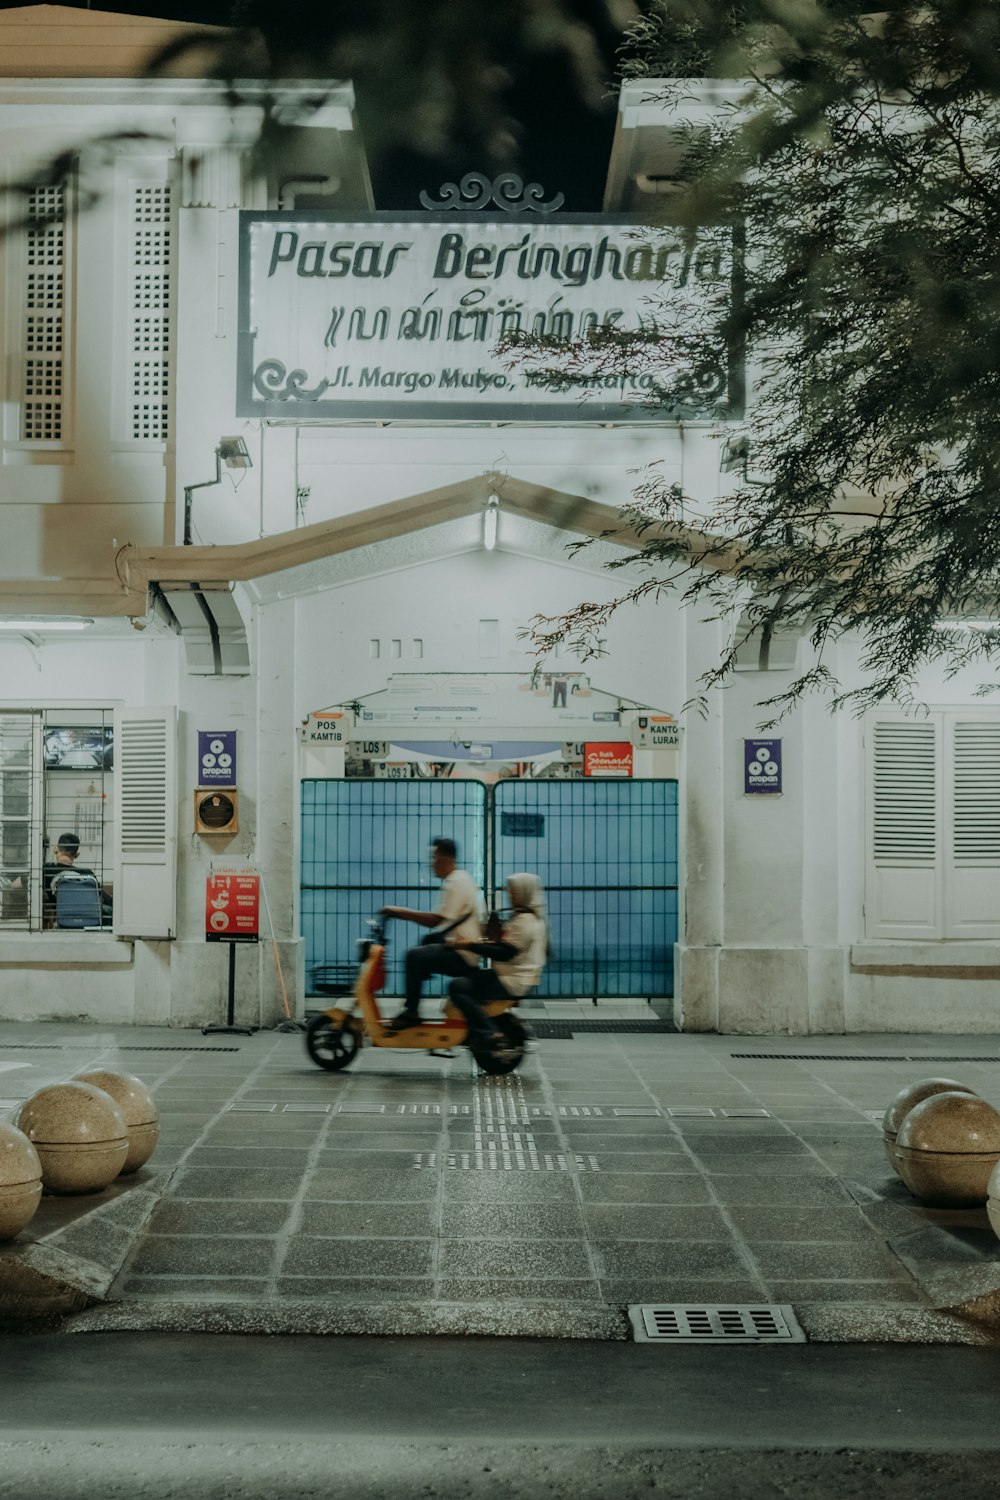 two people riding a scooter in front of a building